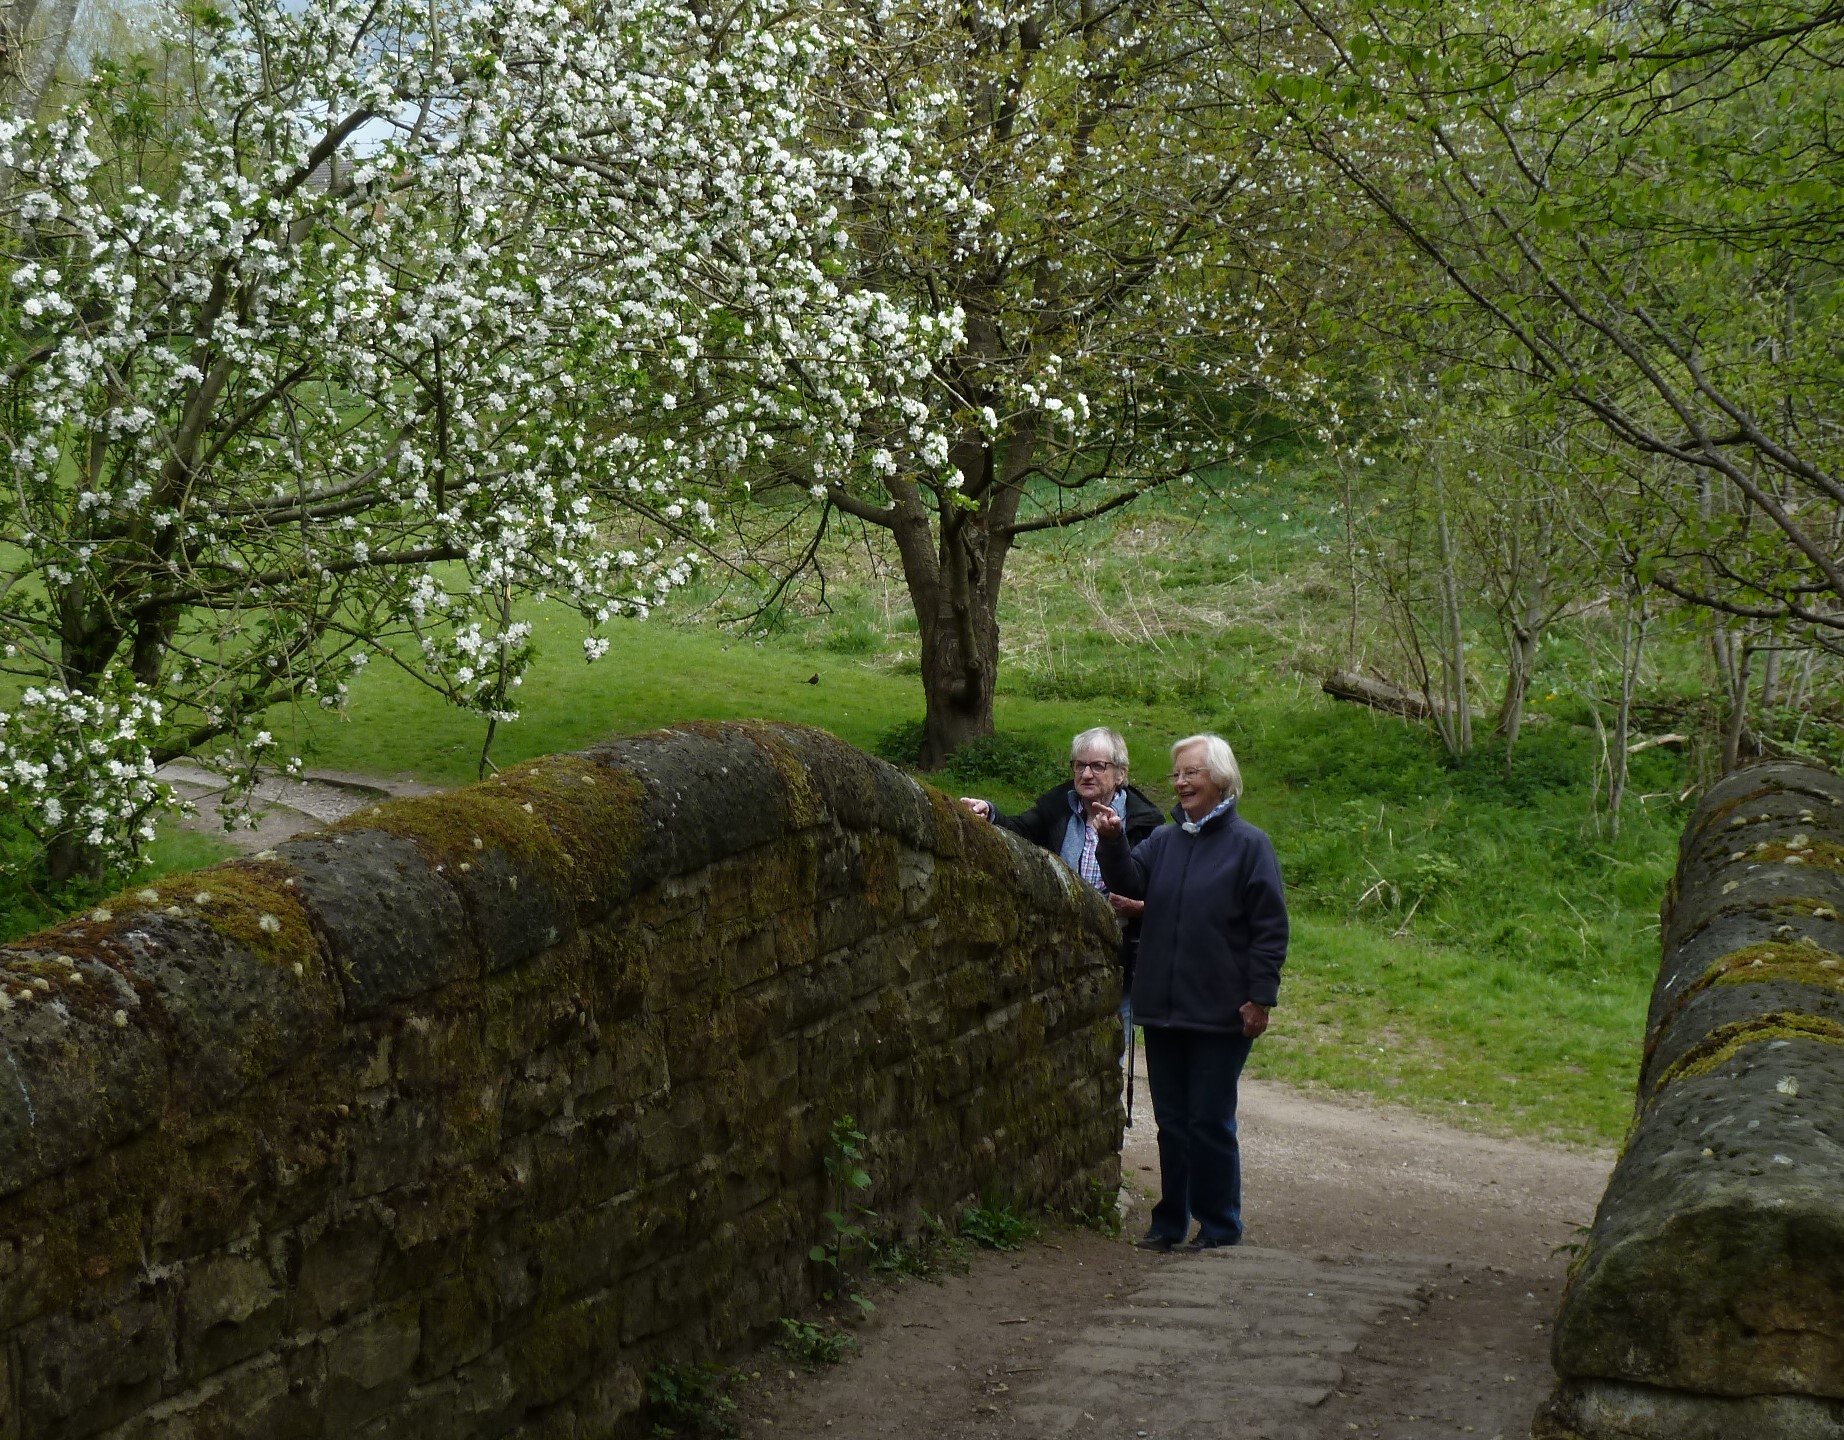  mossy stone wall and apple blossom